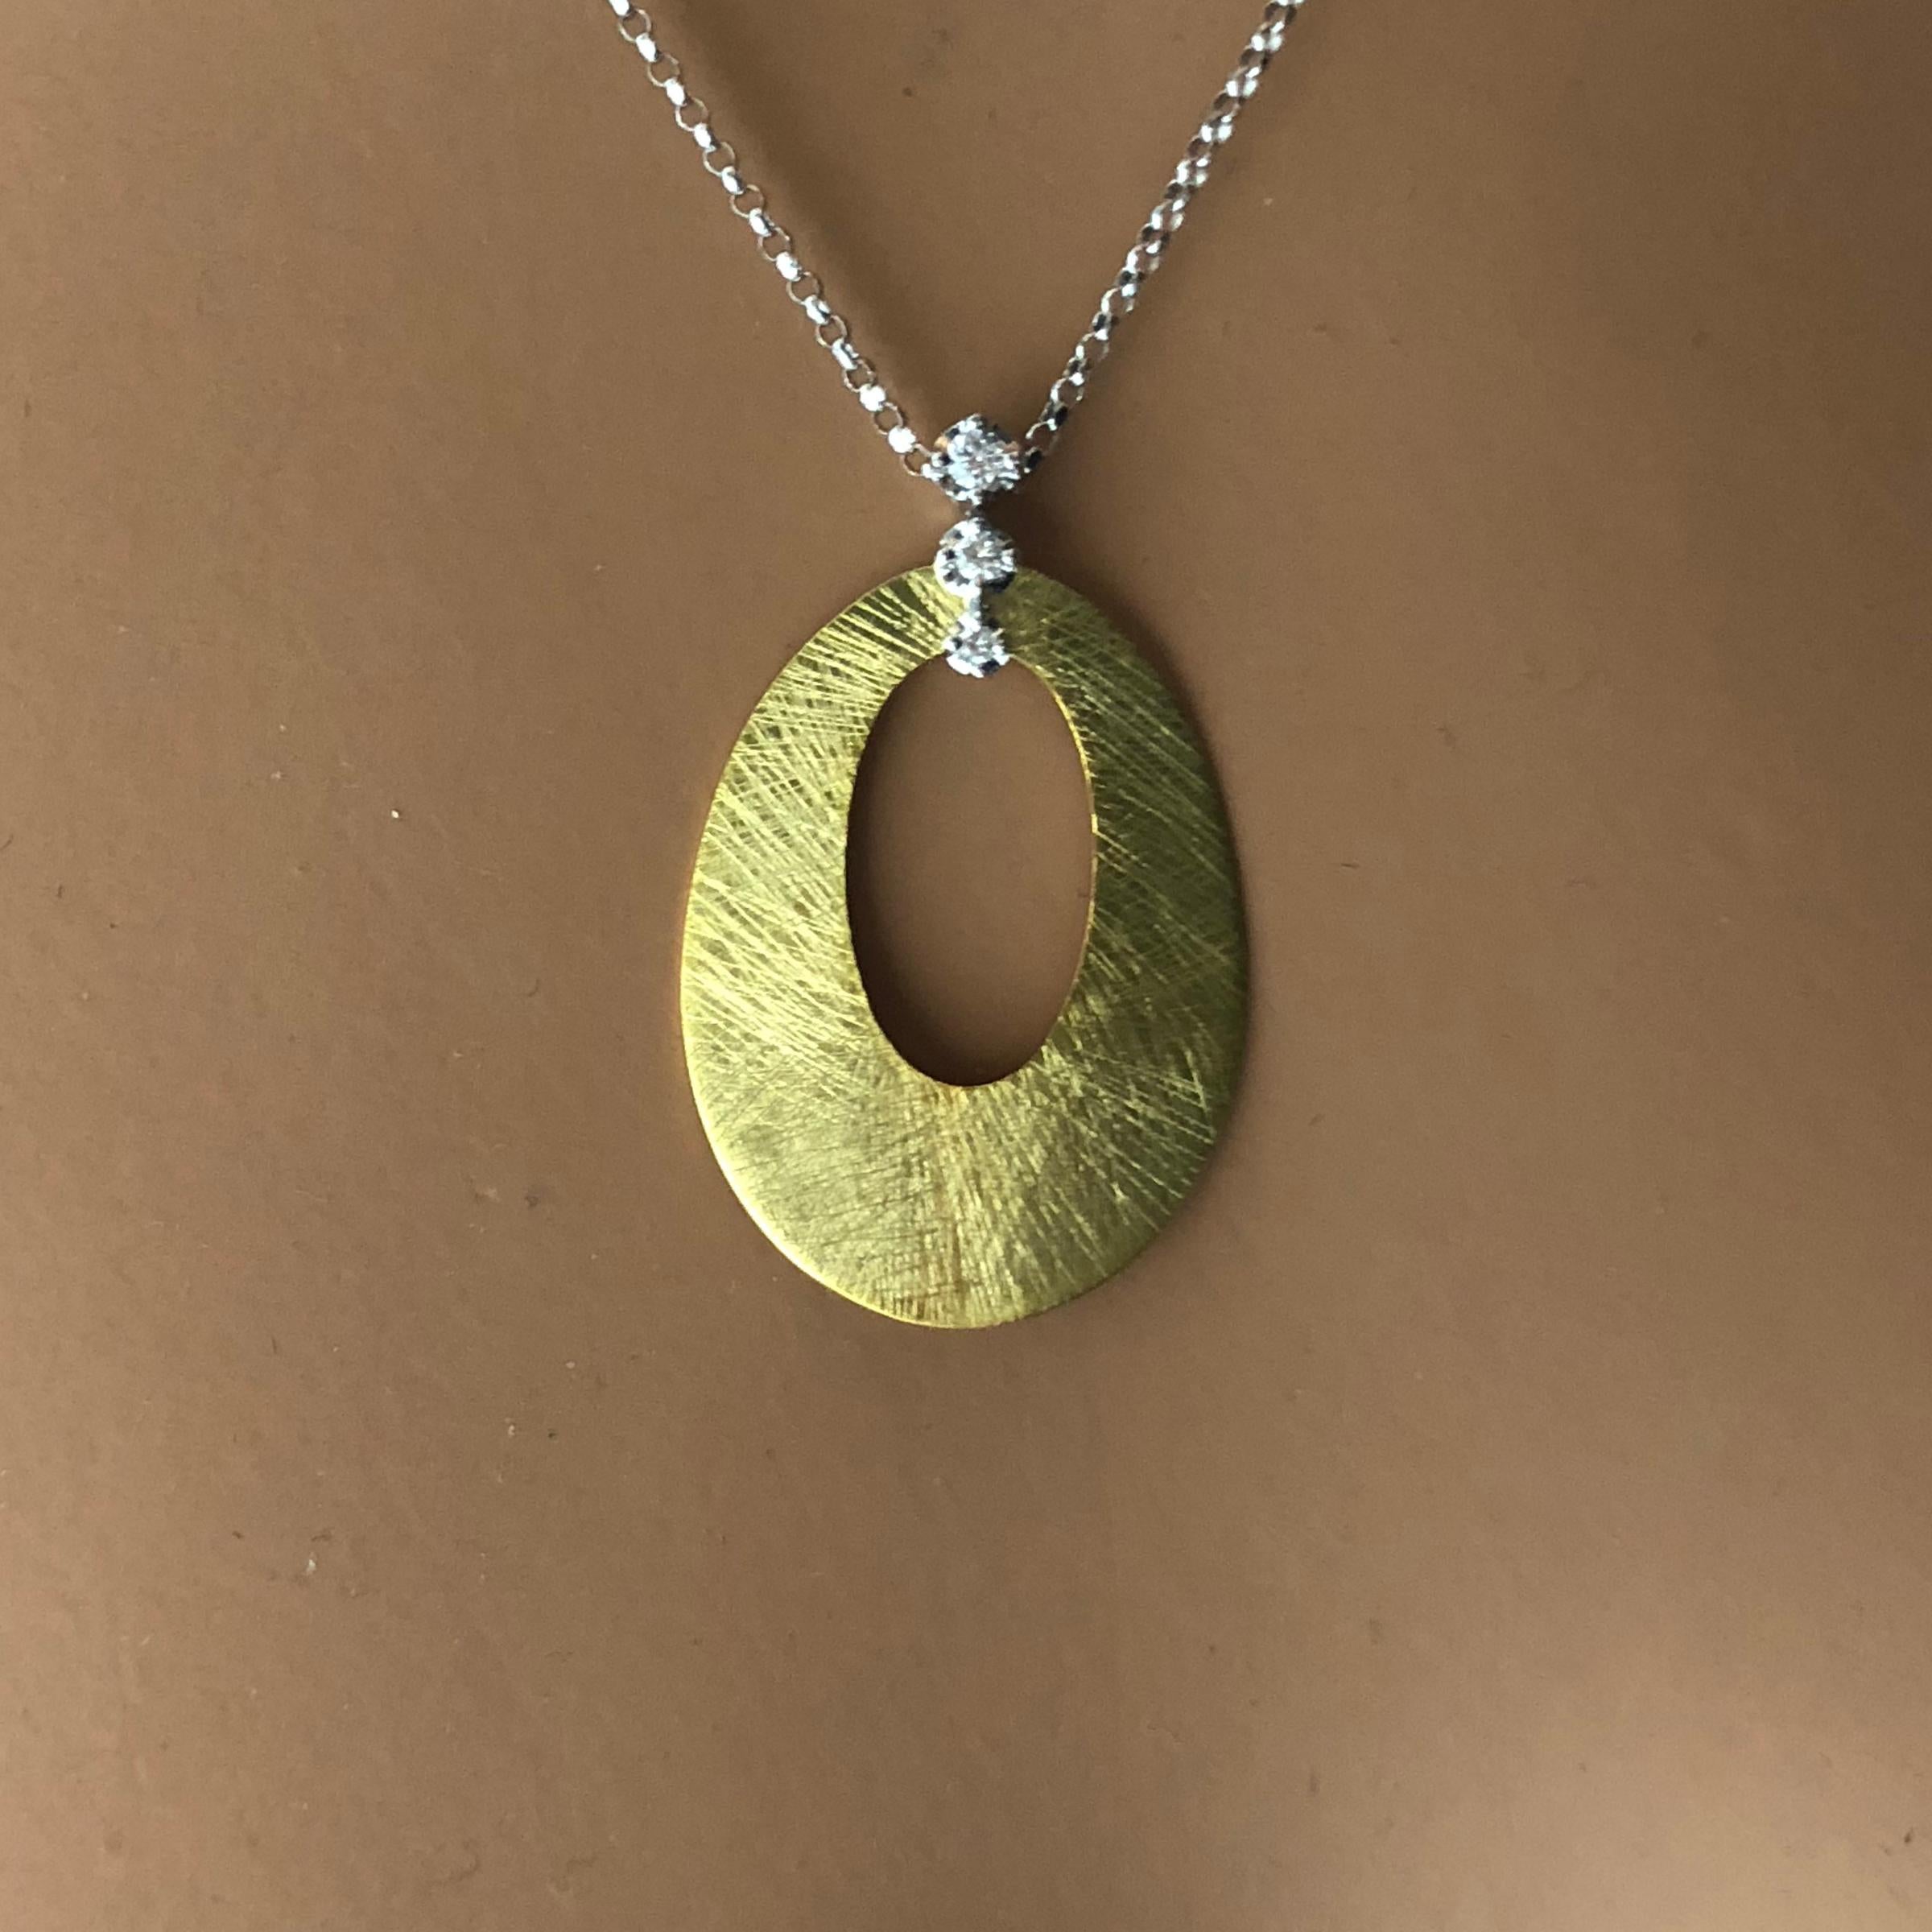 (DiamondTown) This pendant is an oval disc with oval cutout, accented by three round diamonds. Total diamond weight 0.06 carats. A gorgeous accompaniment to any occasion.

Set in 14k Yellow and White Gold.

Many of our items have matching companion